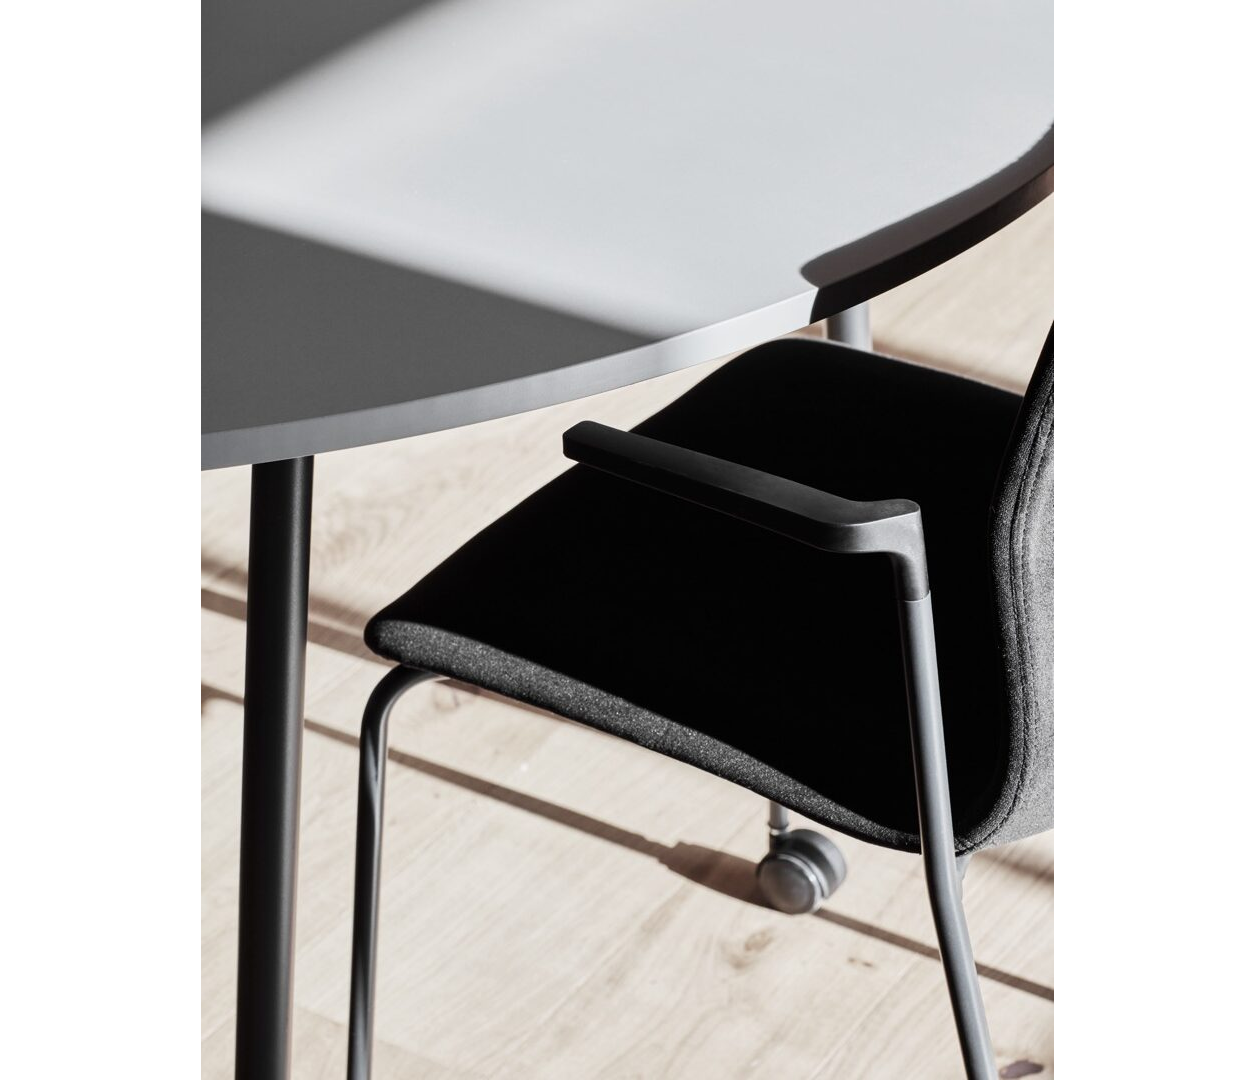 OCEE&FOUR – Chairs – FourSure 77 – Details Image 1 Large